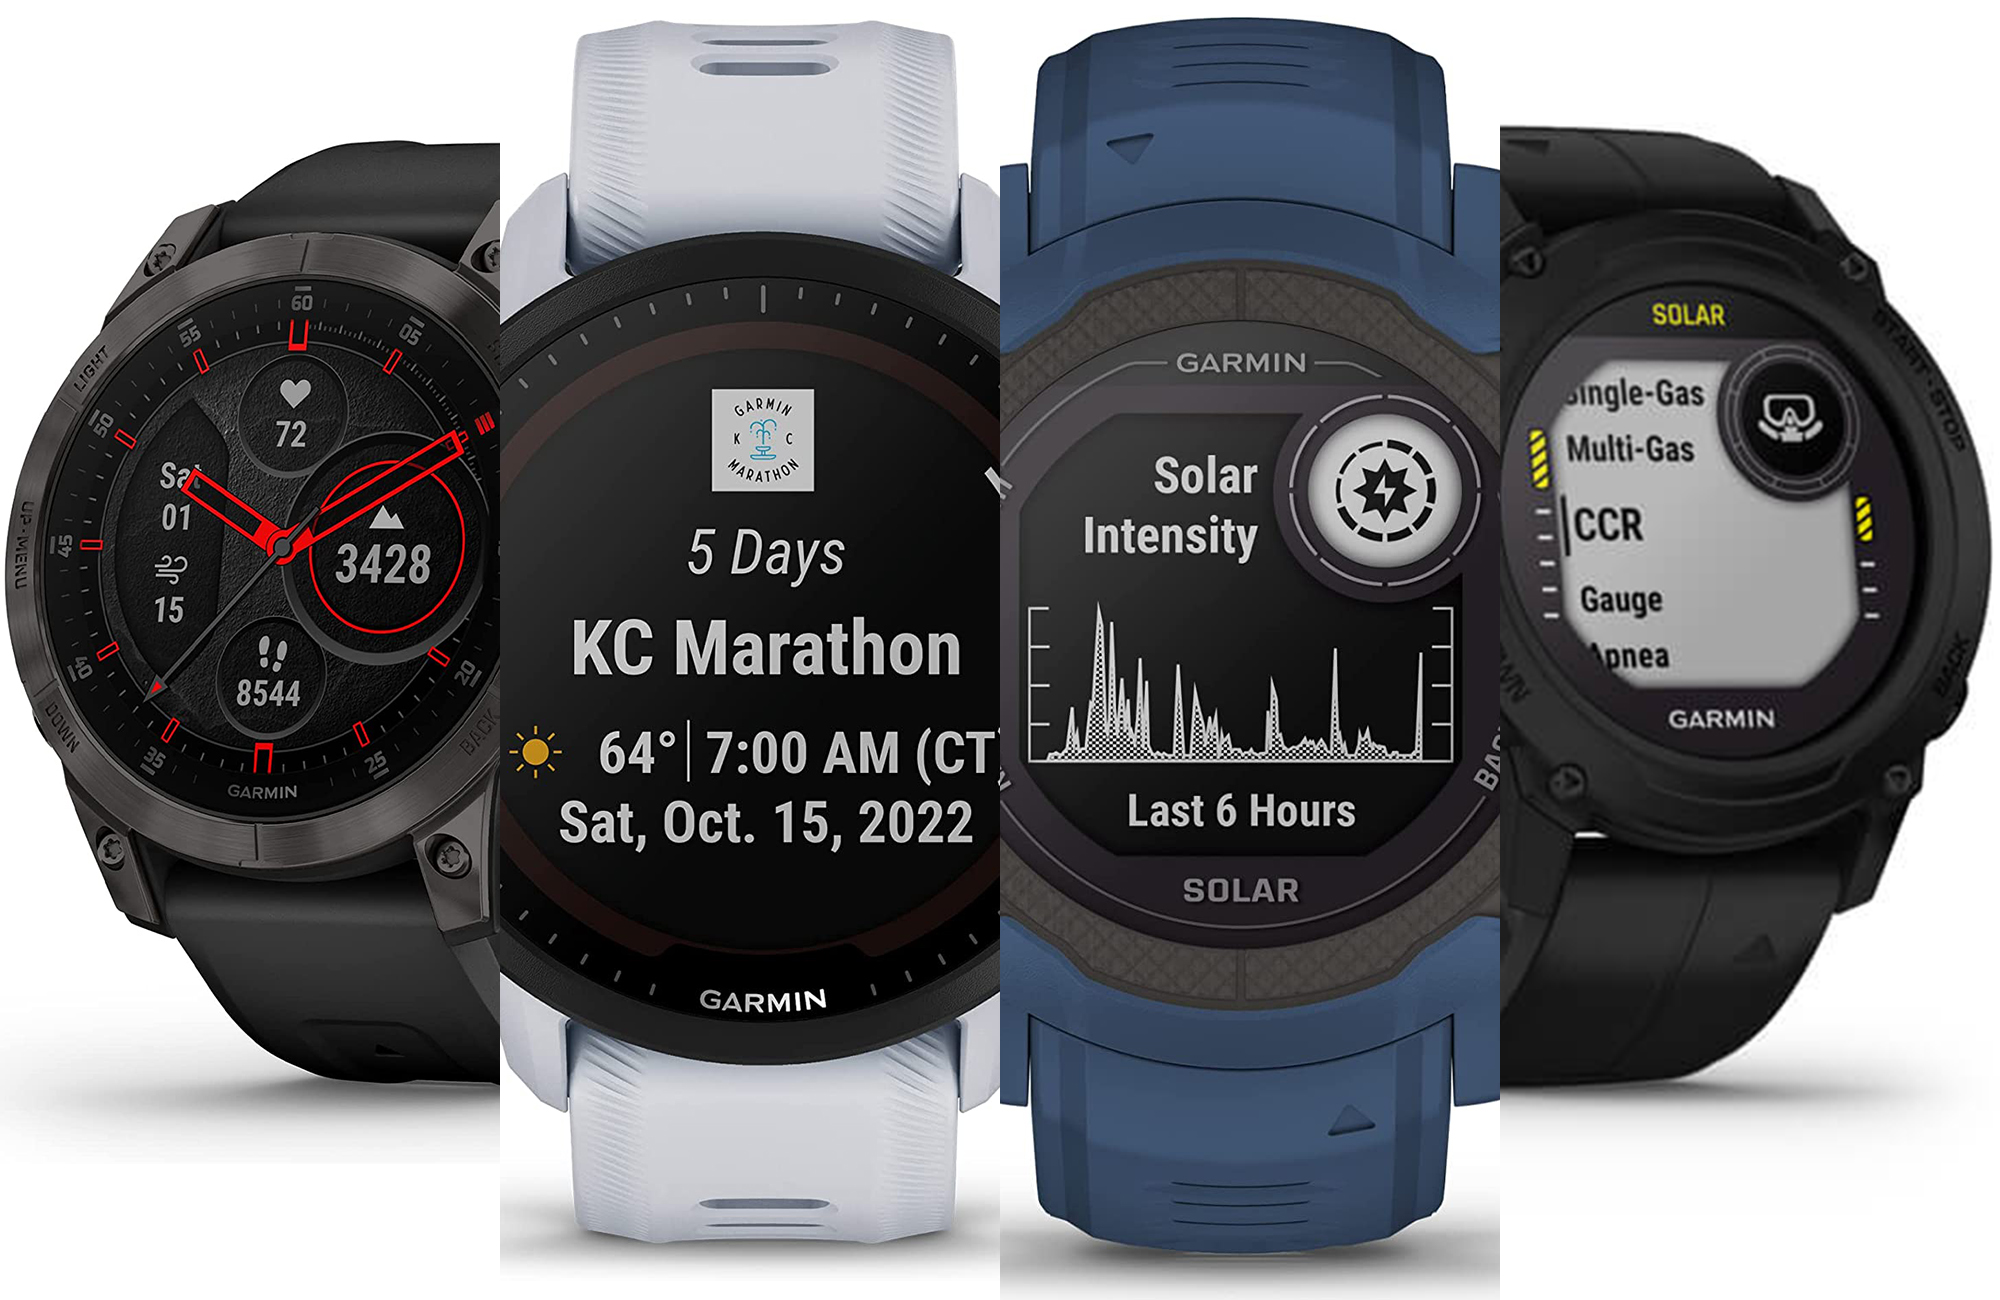 Garmin's latest running watches pair vivid visuals with your vitals